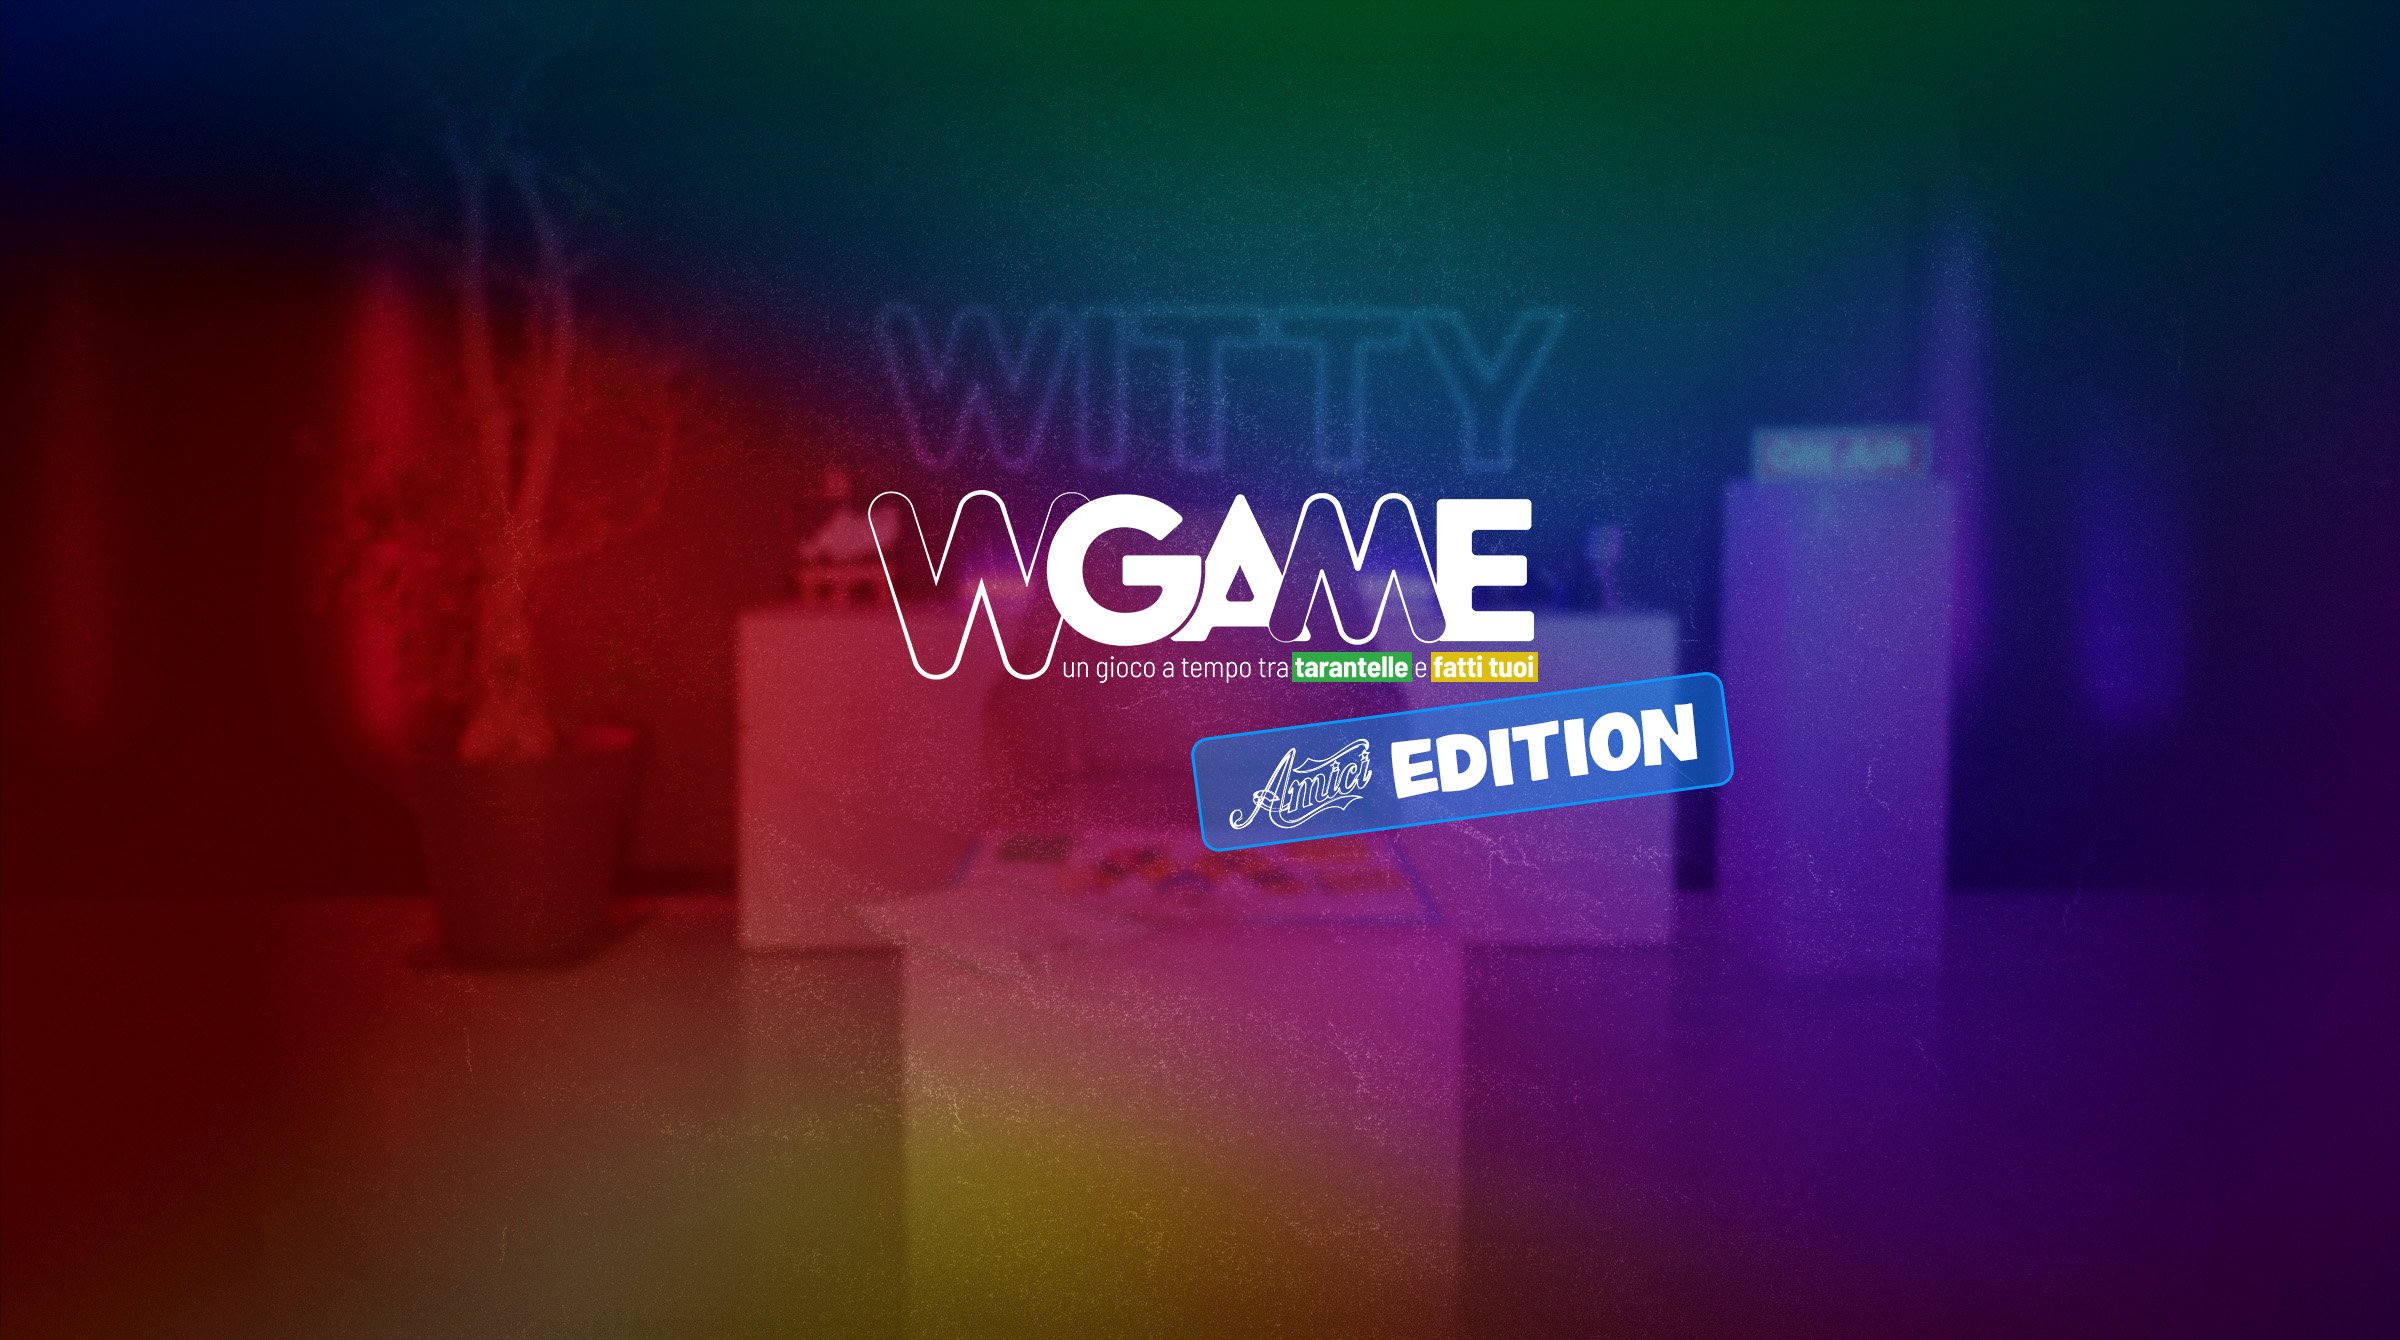 WITTY_W Game Amici EDITION SLIDER